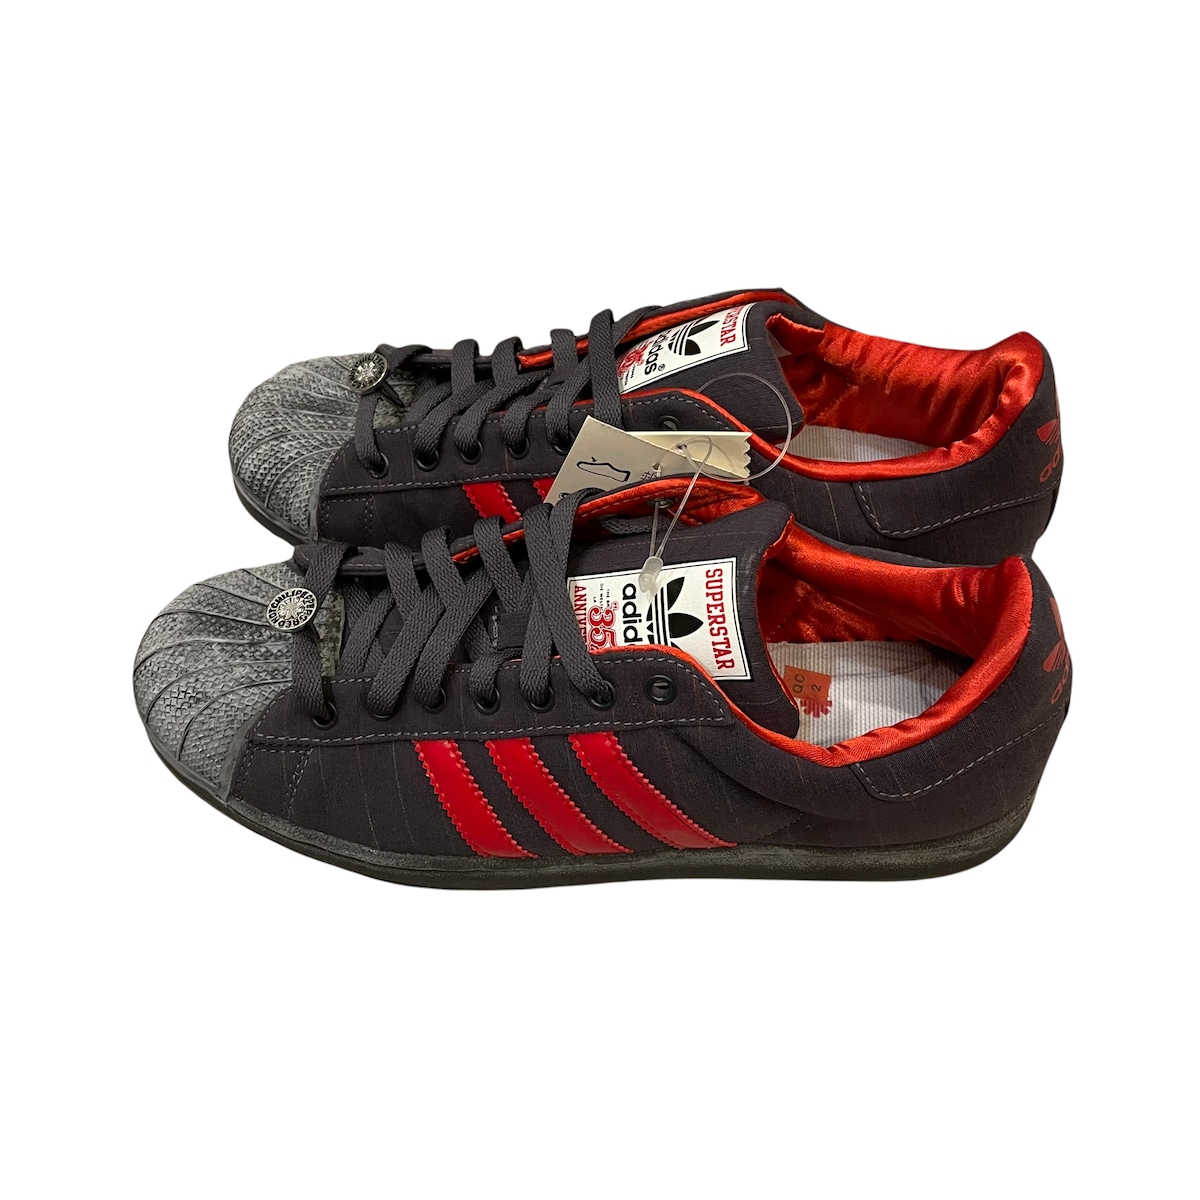 adidas superstar 35th anniversary × RED HOT CHILI PEPPERS ...